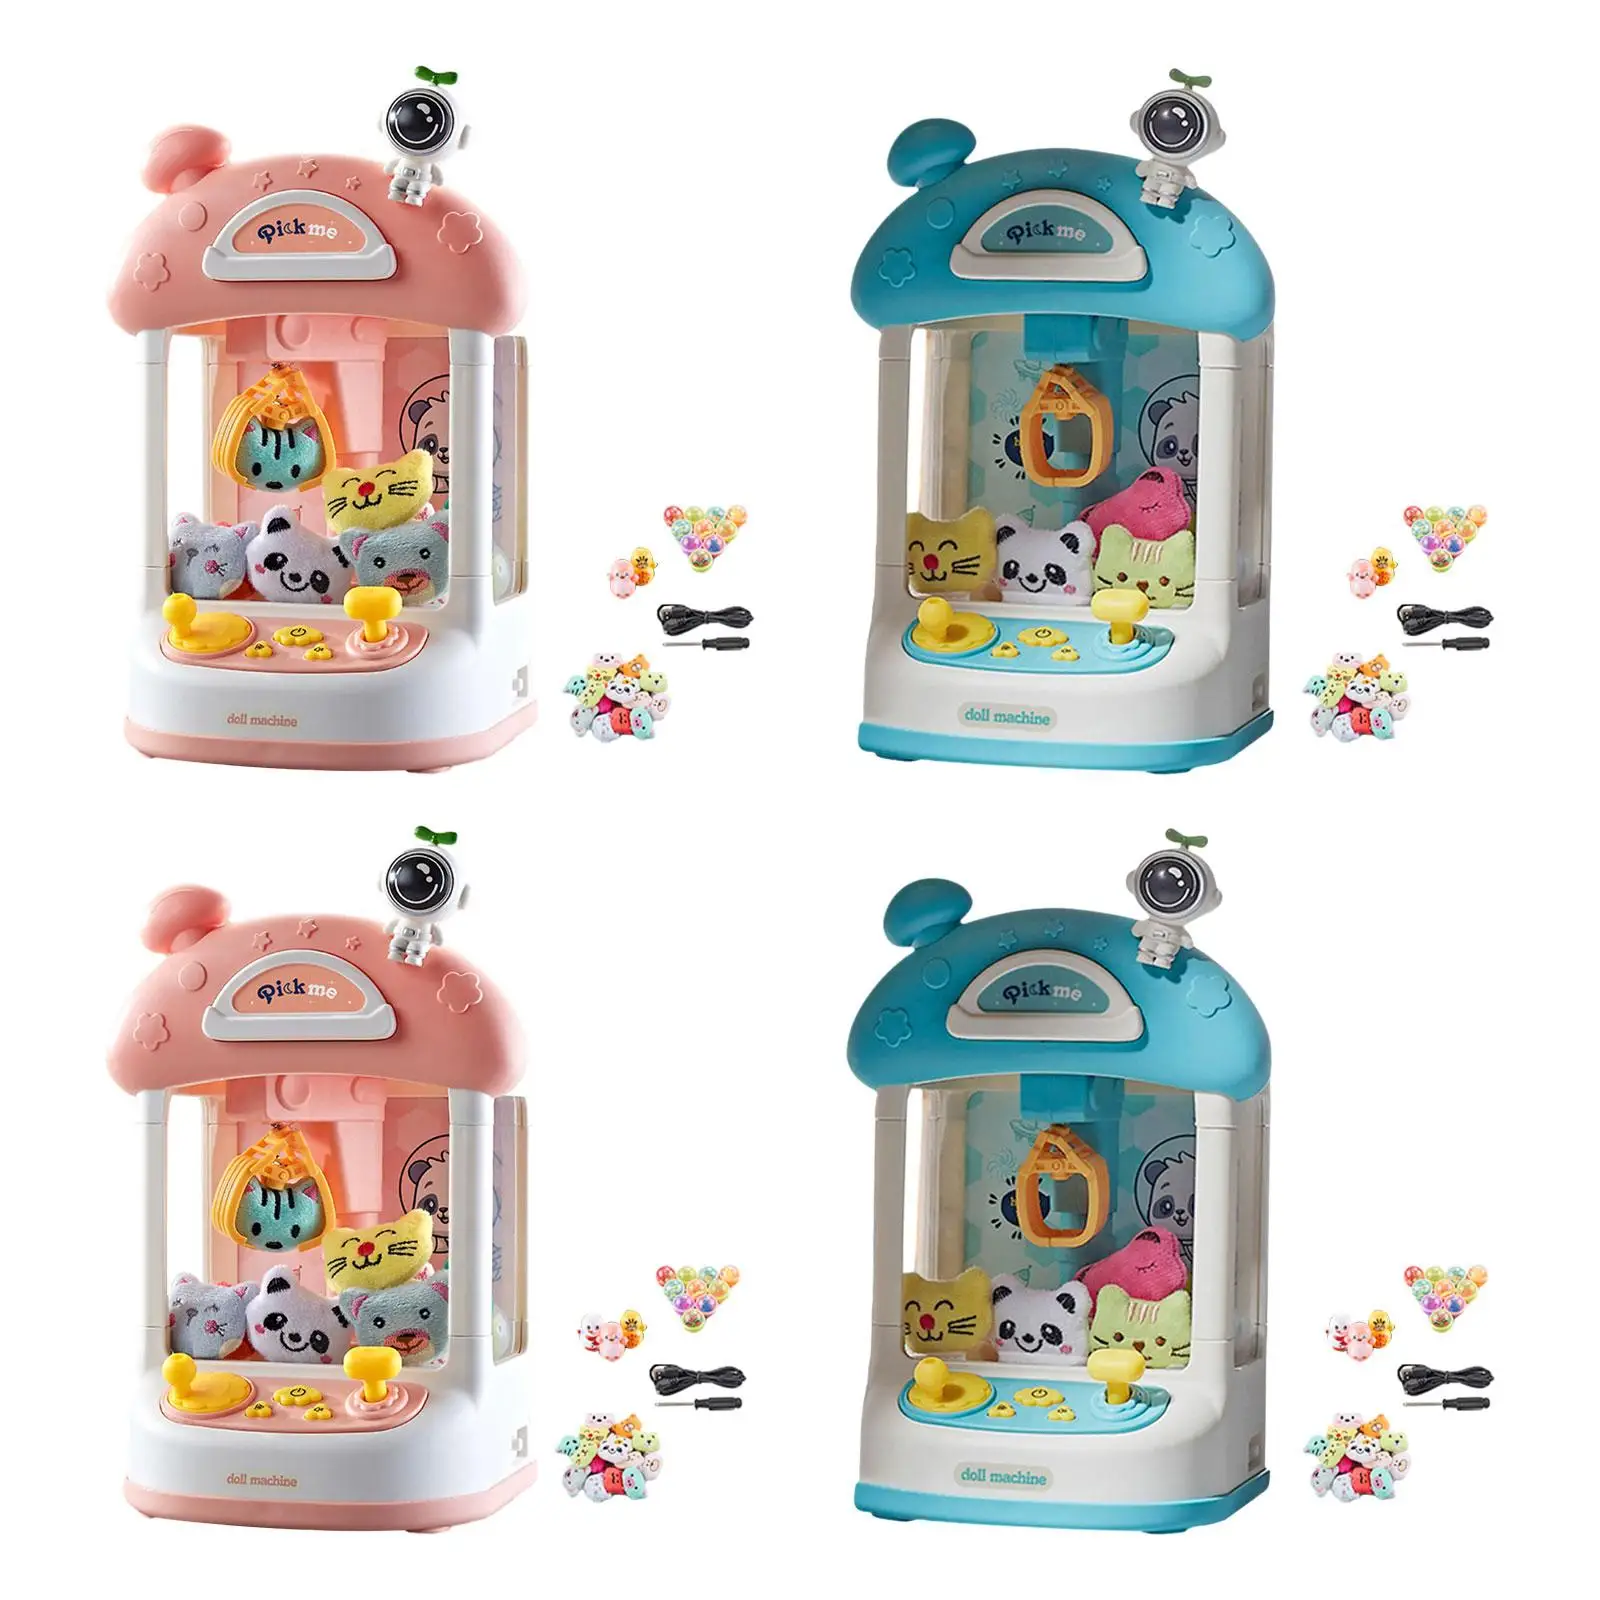 Claw Machine Indoor Two Power Supply Modes Pretend Play Exciting Portable for Boys Girls Vending Toy Candy Prizes Dispenser Game